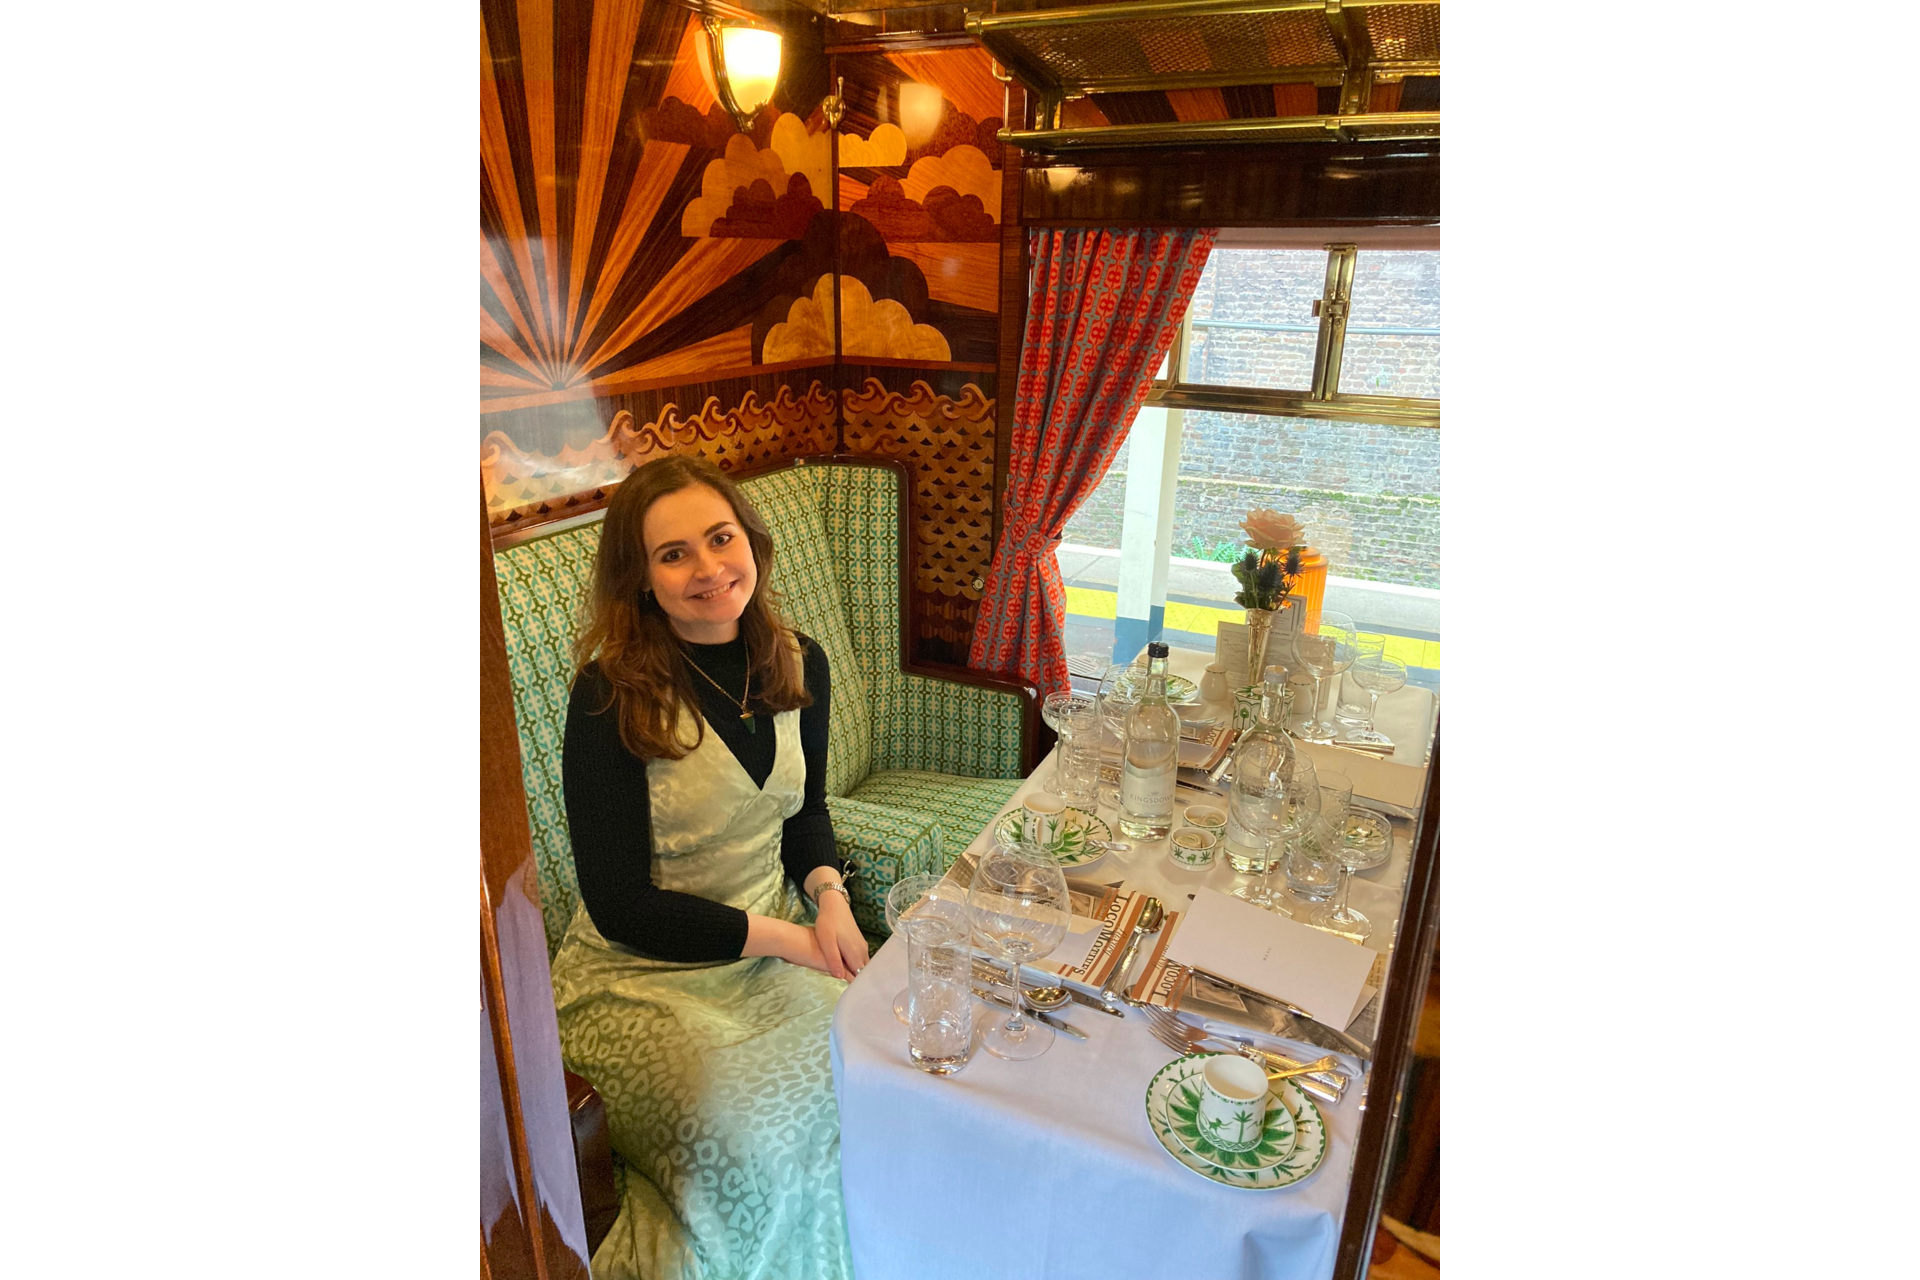 Woman in green dress in ornately decorated train cabin